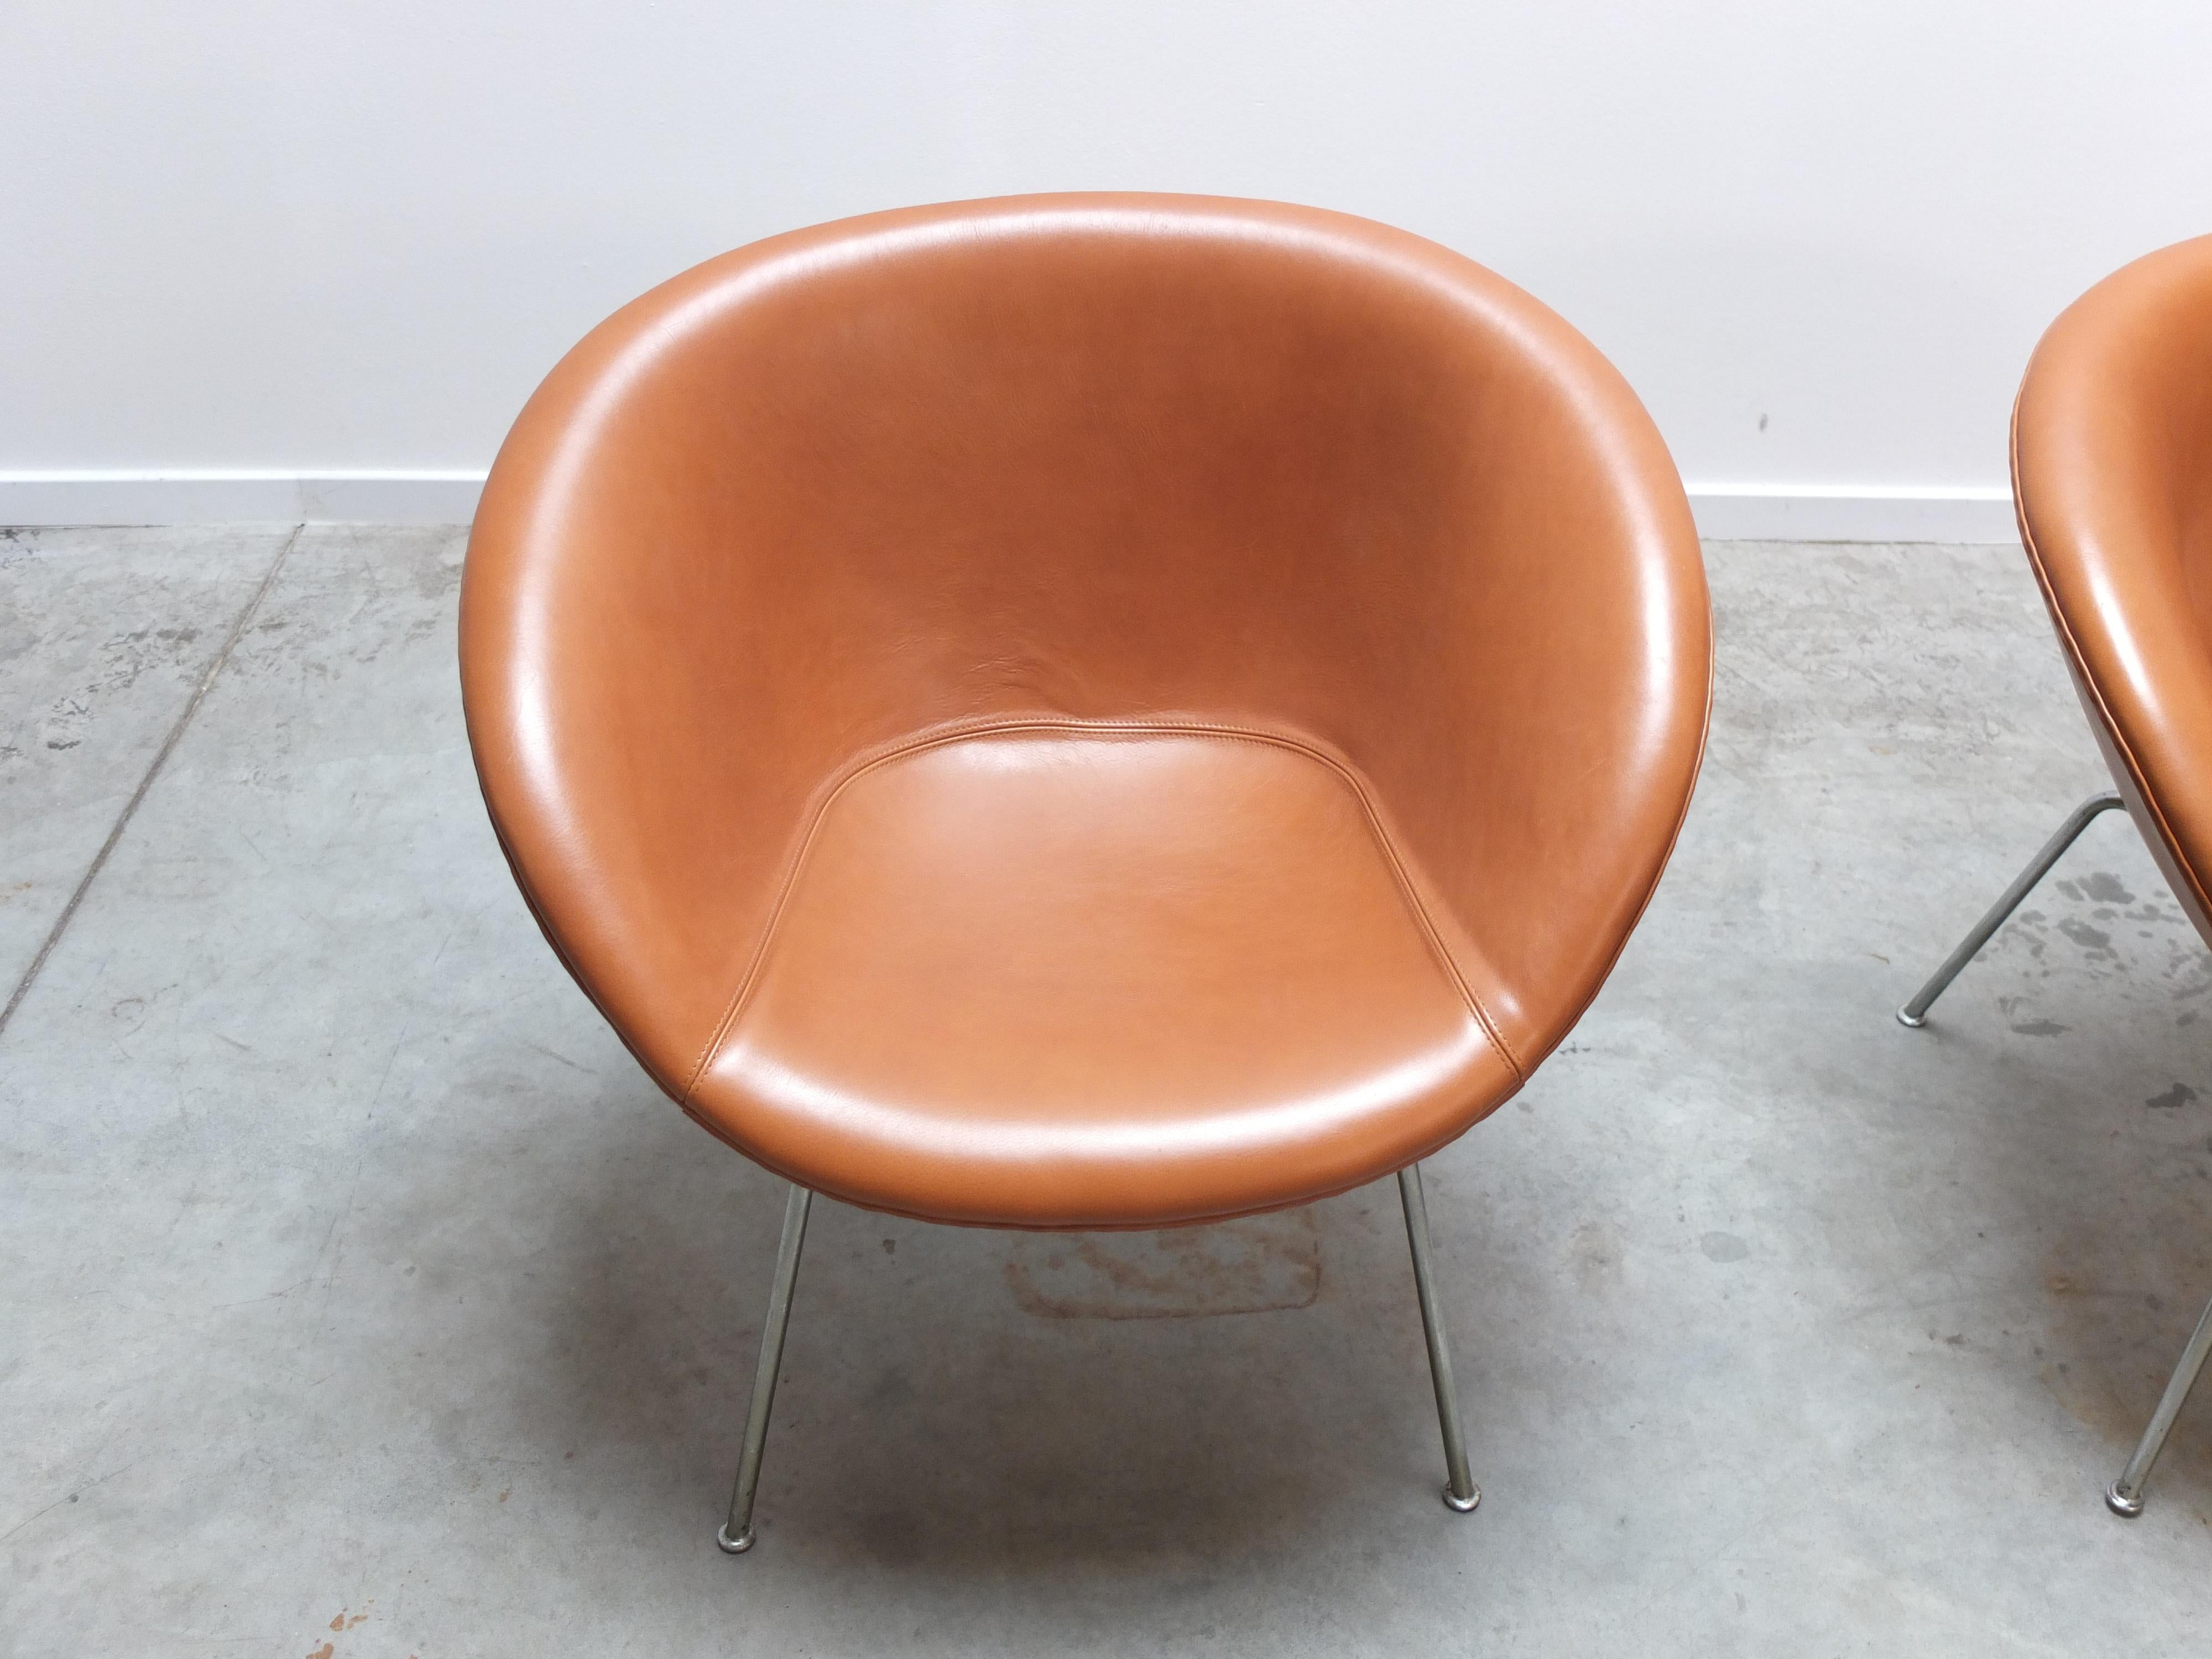 20th Century Early Pair of 'Pot' Lounge Chairs by Arne Jacobsen for Fritz Hansen, 1950s For Sale